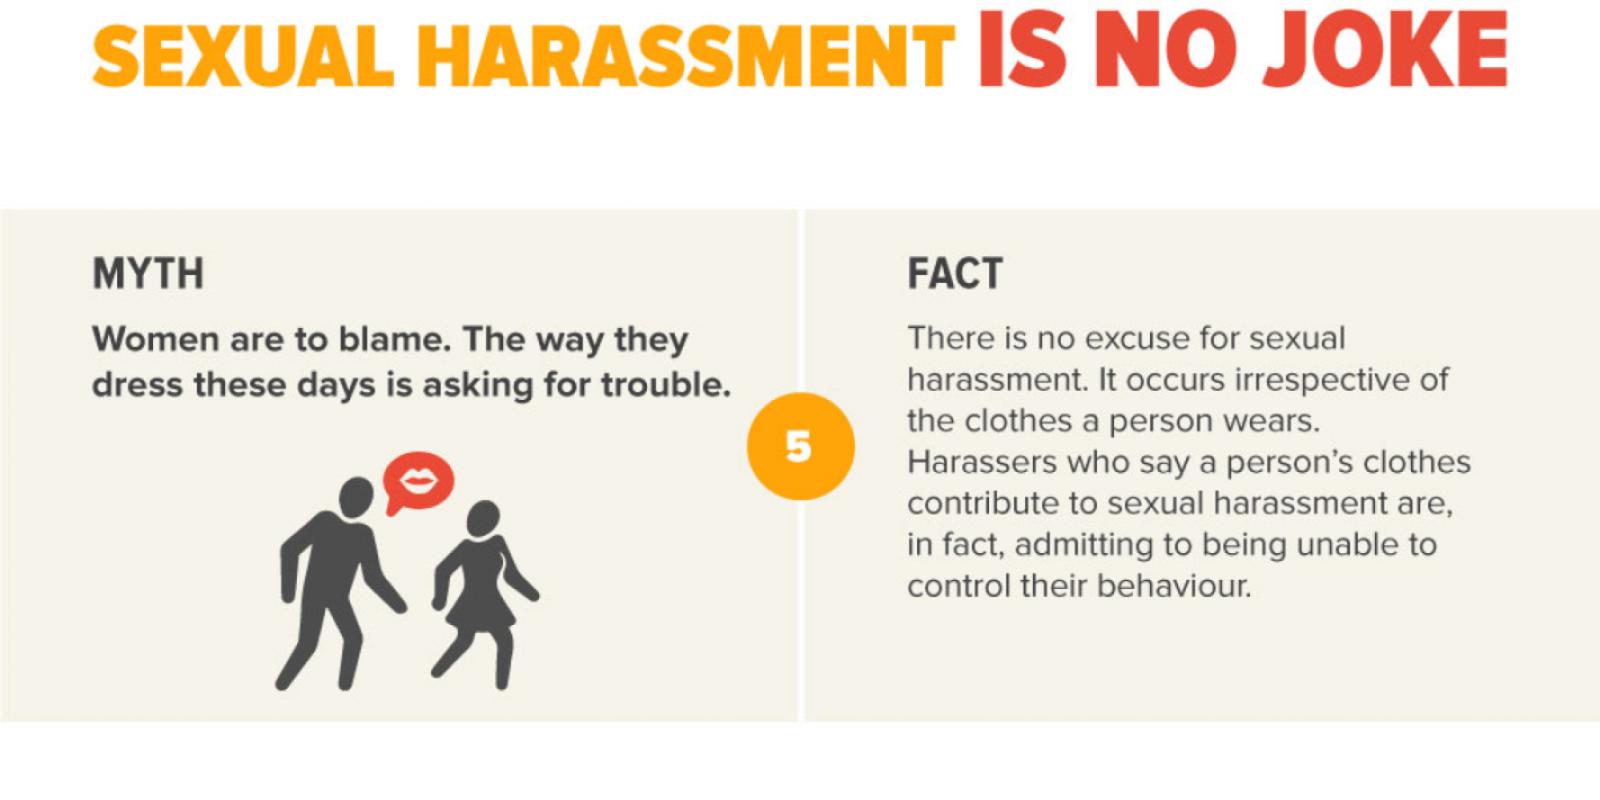 MYTH Women are to blame. The way they dress these days is asking for trouble.  FACT There is no excuse for sexual harassment. It occurs irrespective of the clothes a person wears. Harassers who say a person’s clothes contribute to sexual harassment are, in fact, admitting to being unable to control their behaviour.